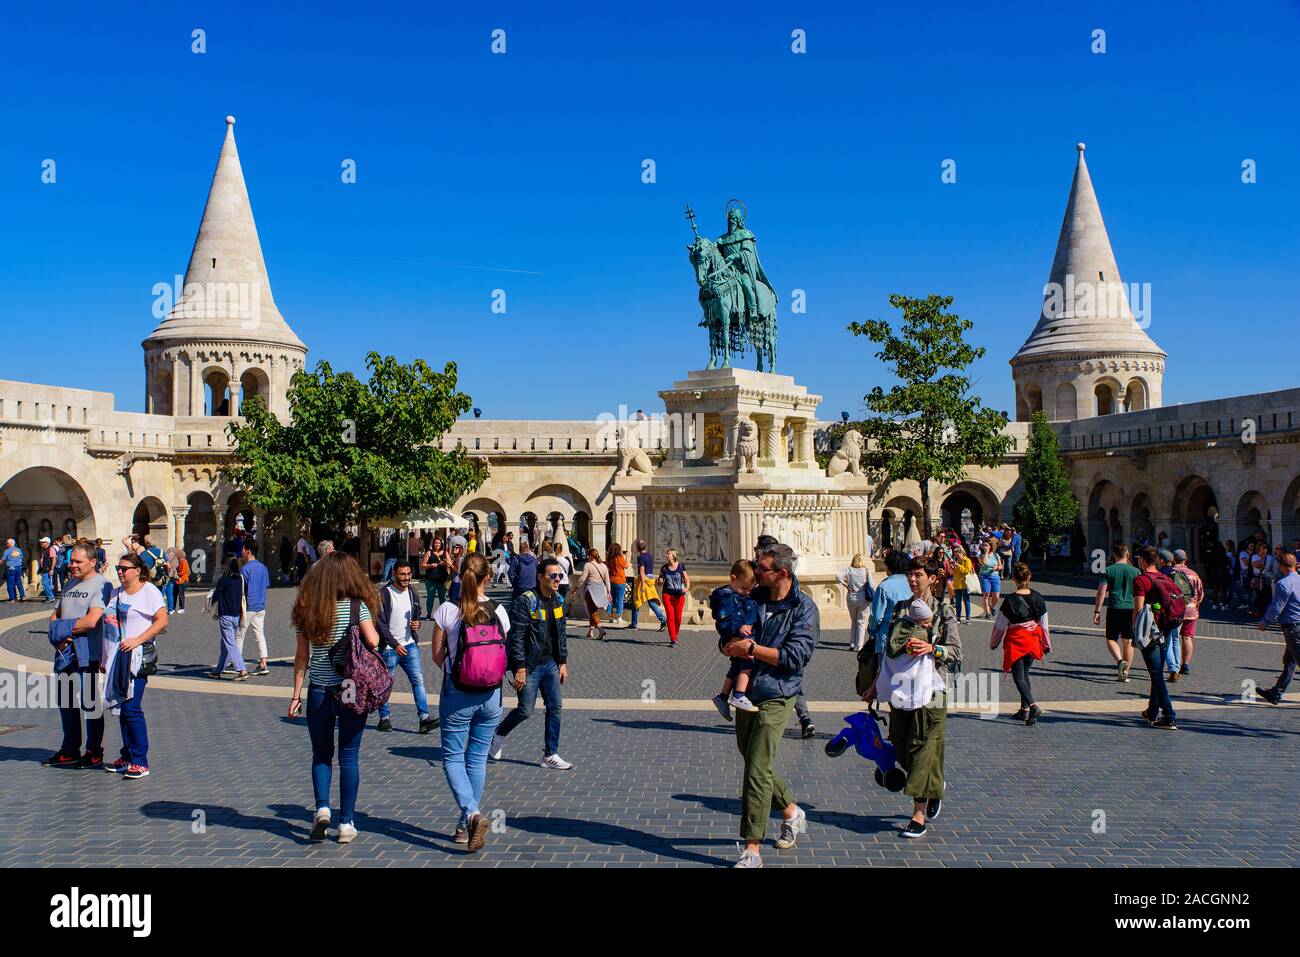 Fisherman's Bastion, one of the best known monuments in Budapest in the Buda Castle District, Hungary Stock Photo